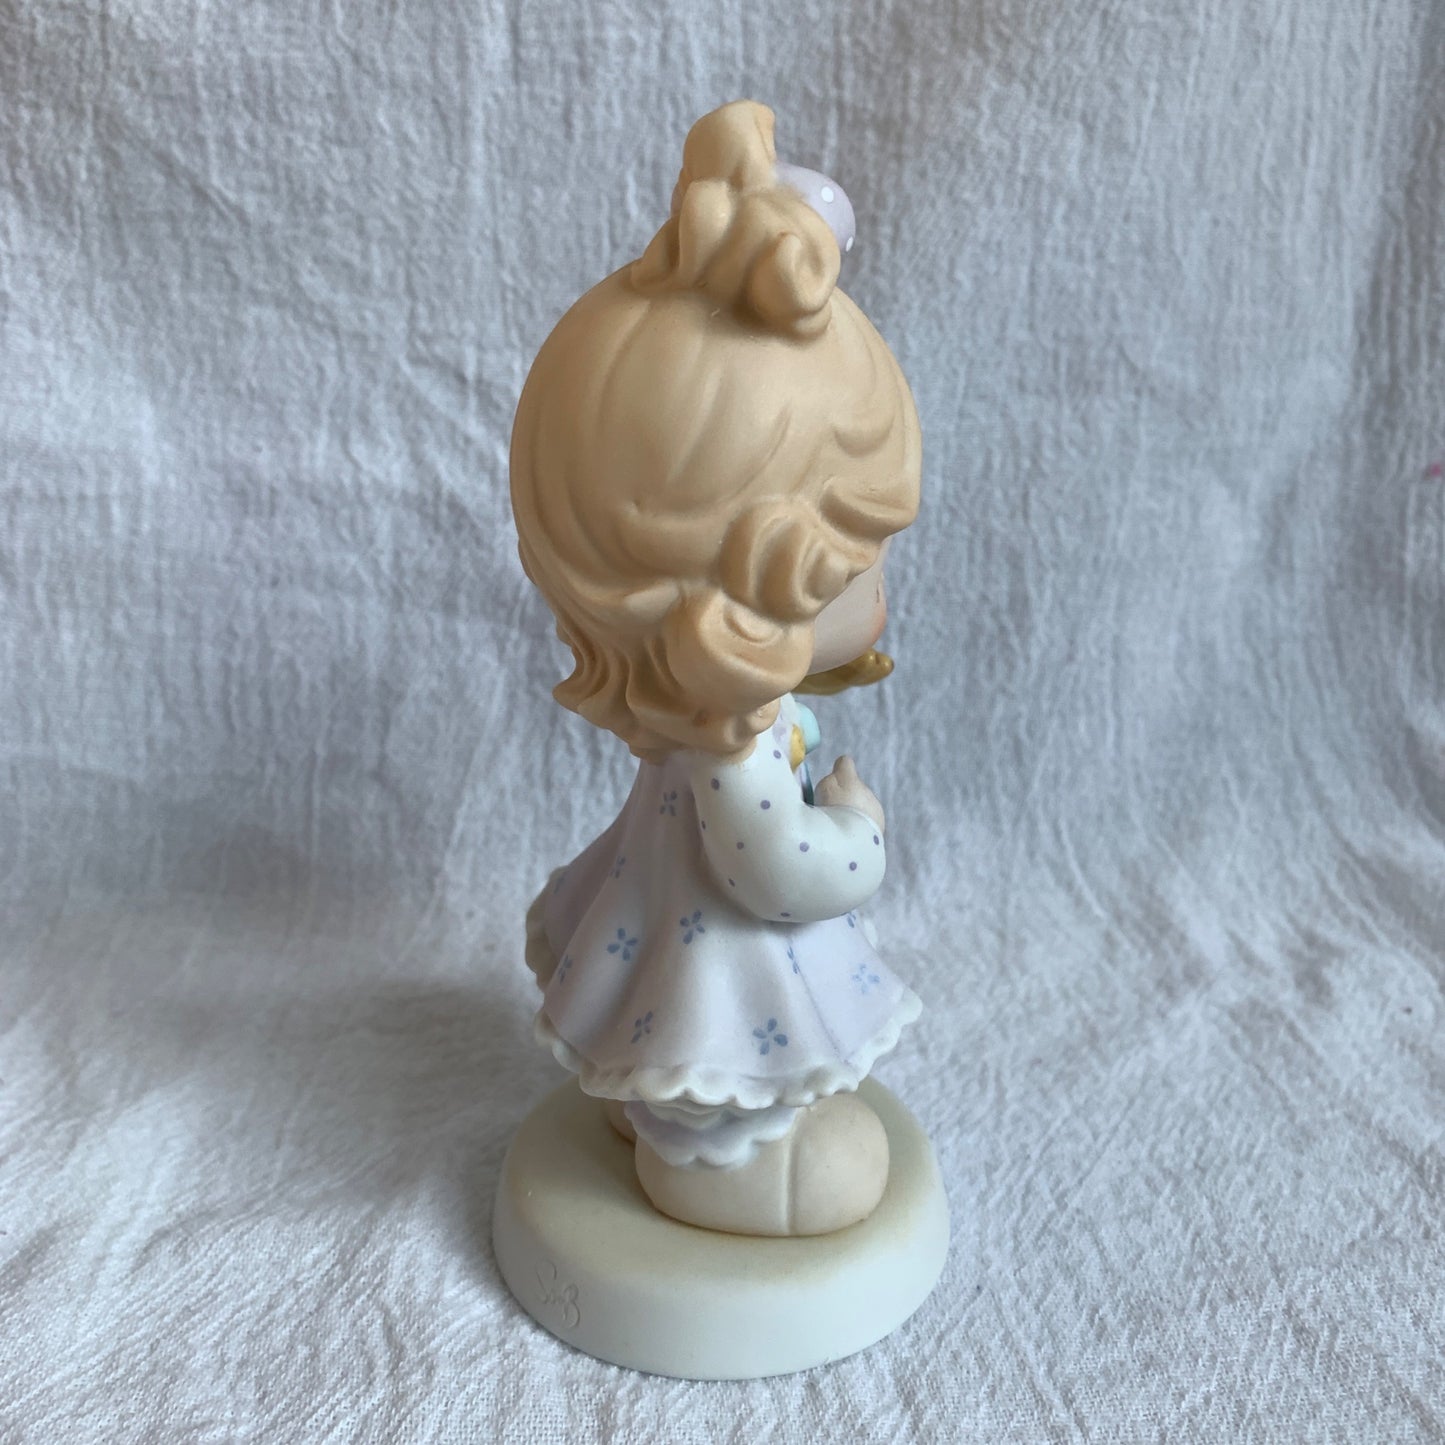 Precious Moments 115914 You're A-Peeling to Me Figurine in Box